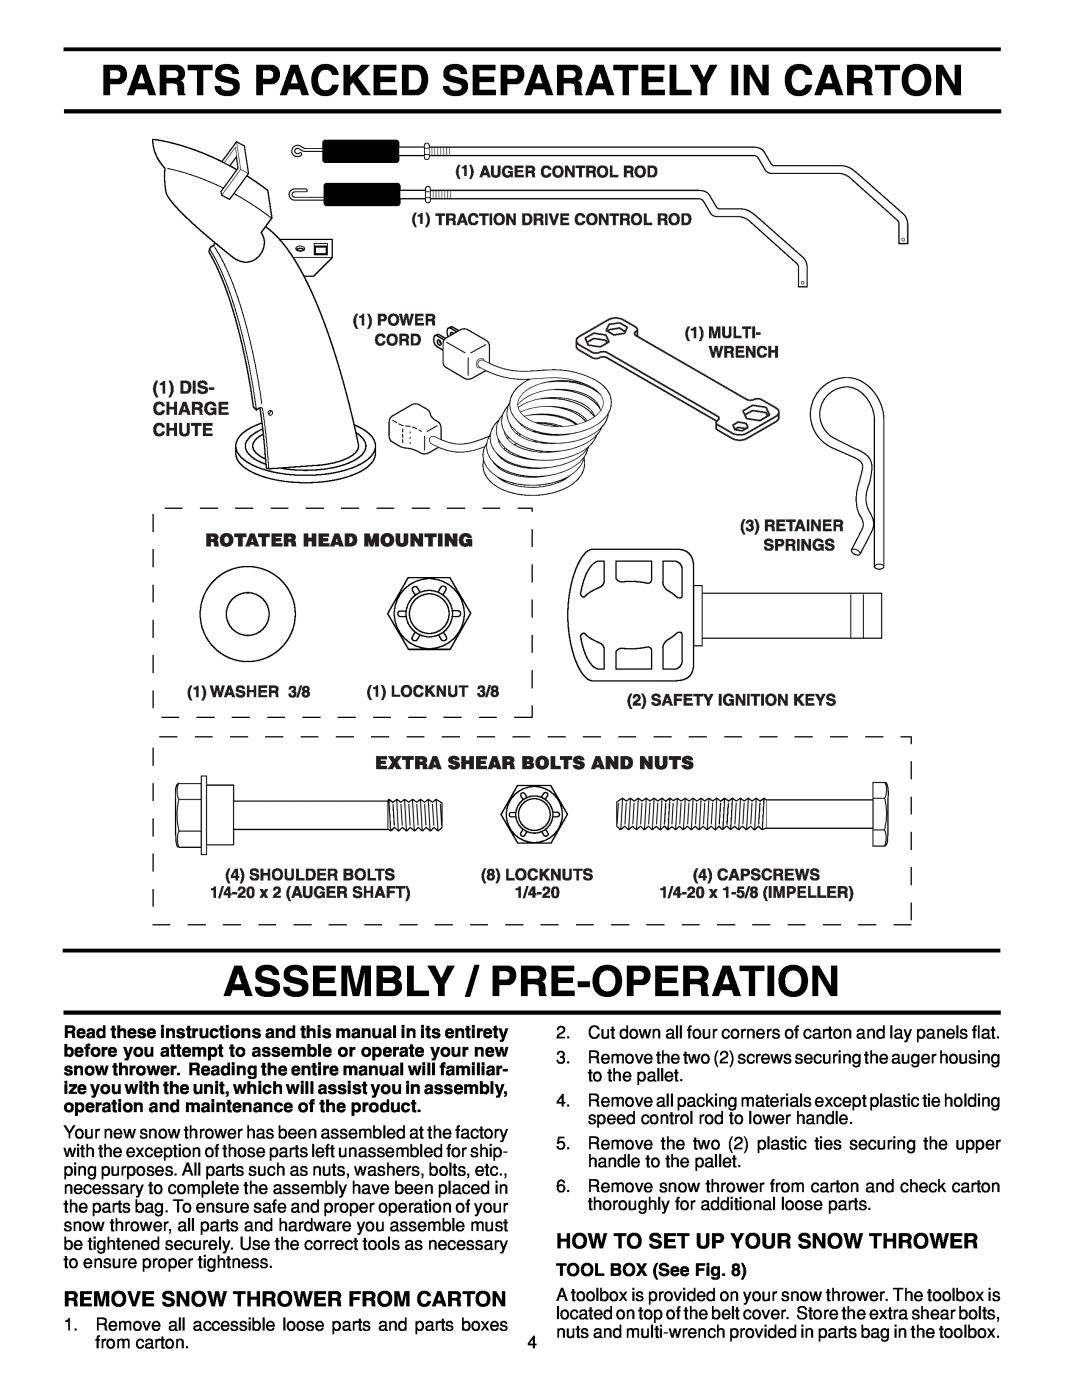 Poulan PP8527ES owner manual Parts Packed Separately In Carton, Assembly / Pre-Operation, How To Set Up Your Snow Thrower 